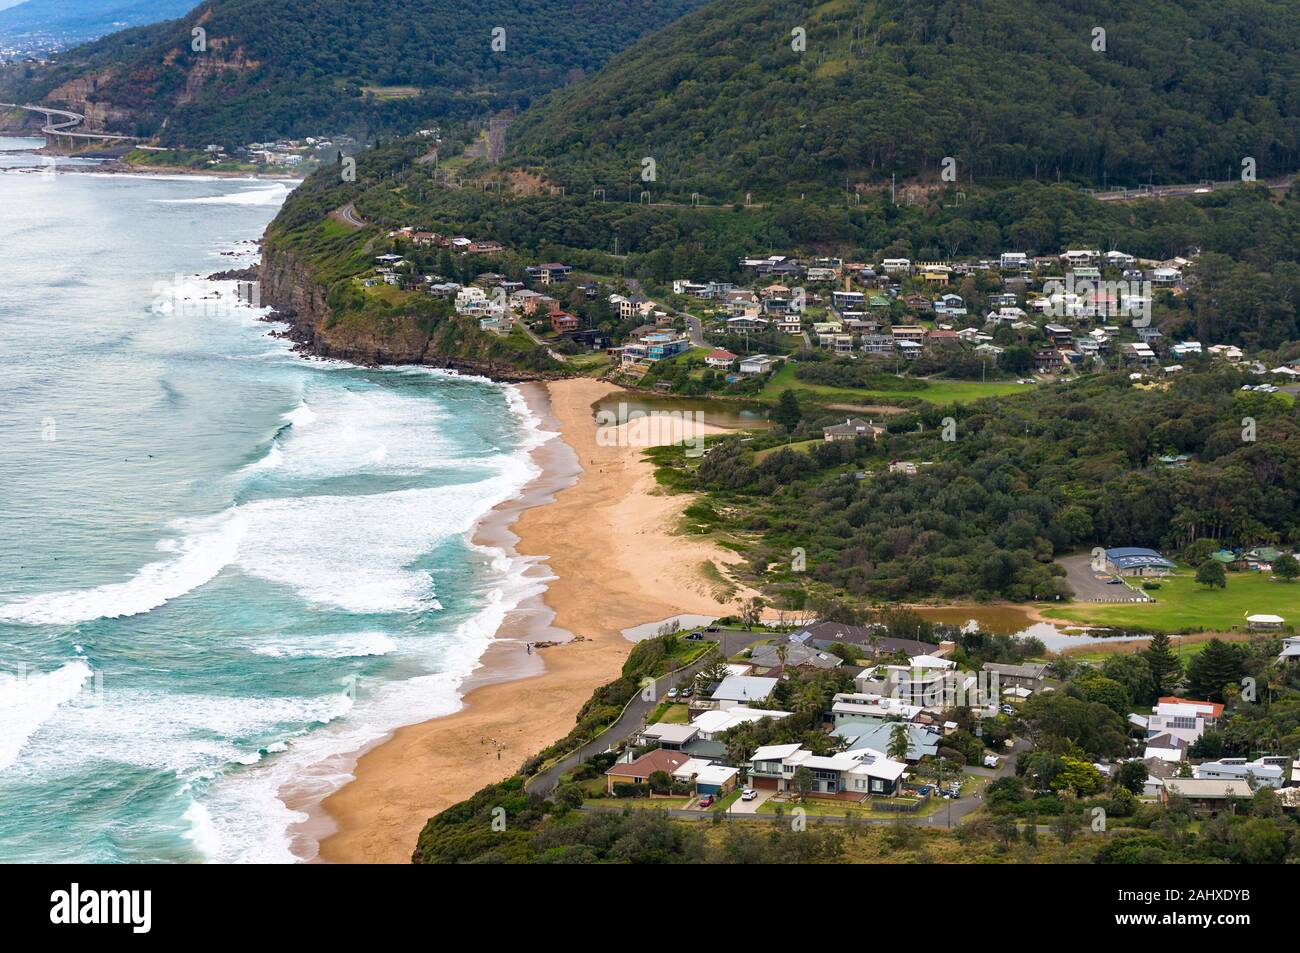 Aerial view on picturesque landscape of ocean beach and town among mountains. Stanwell beach, Australia Stock Photo